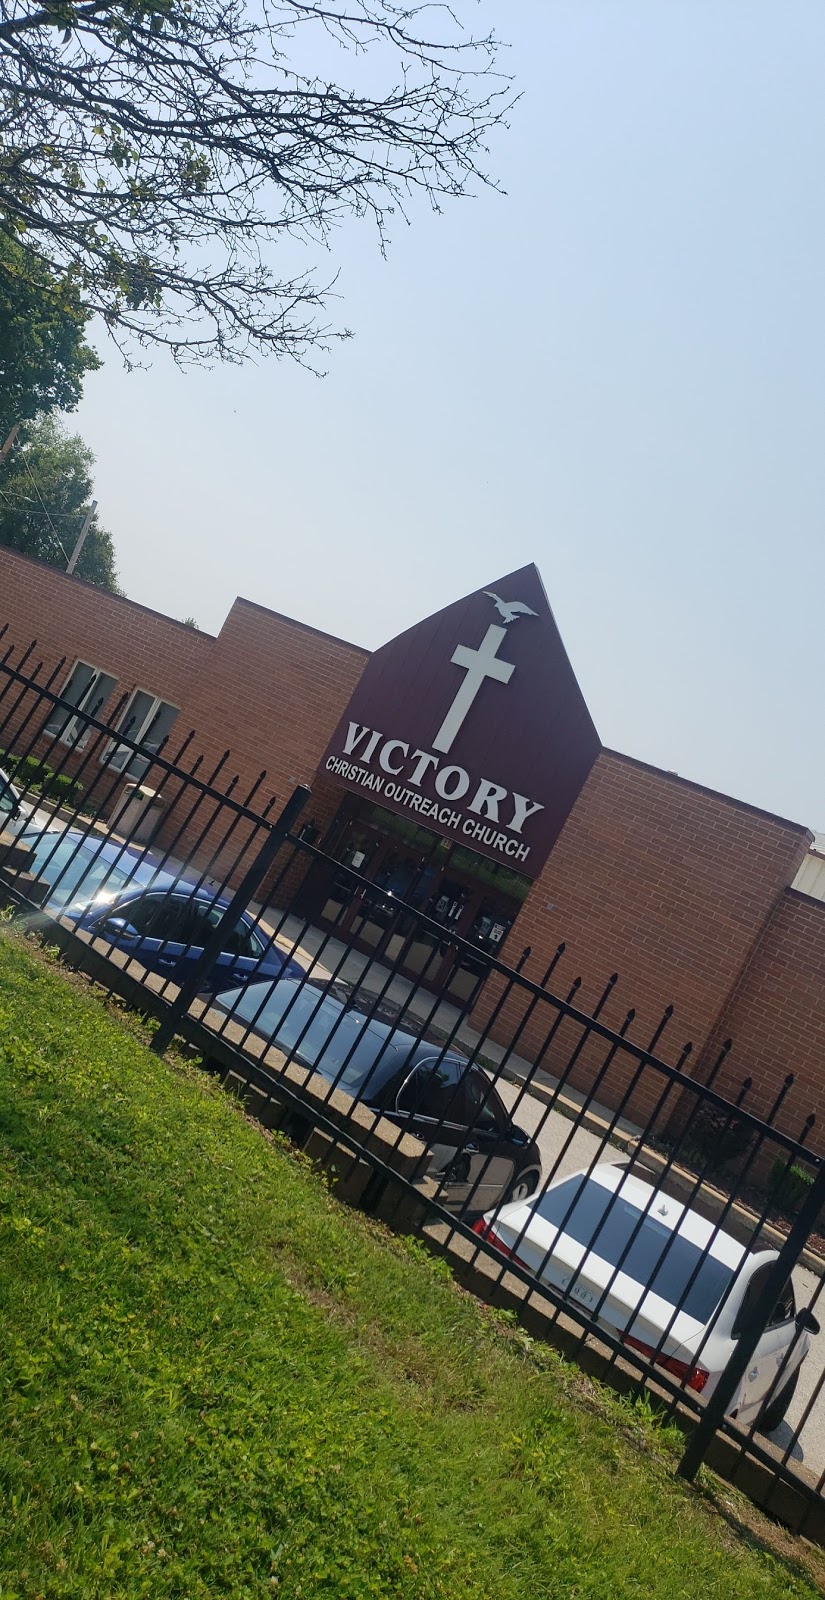 Victory Christian Outreach Church | 7091 Olive Blvd, St. Louis, MO 63130 | Phone: (314) 726-2009